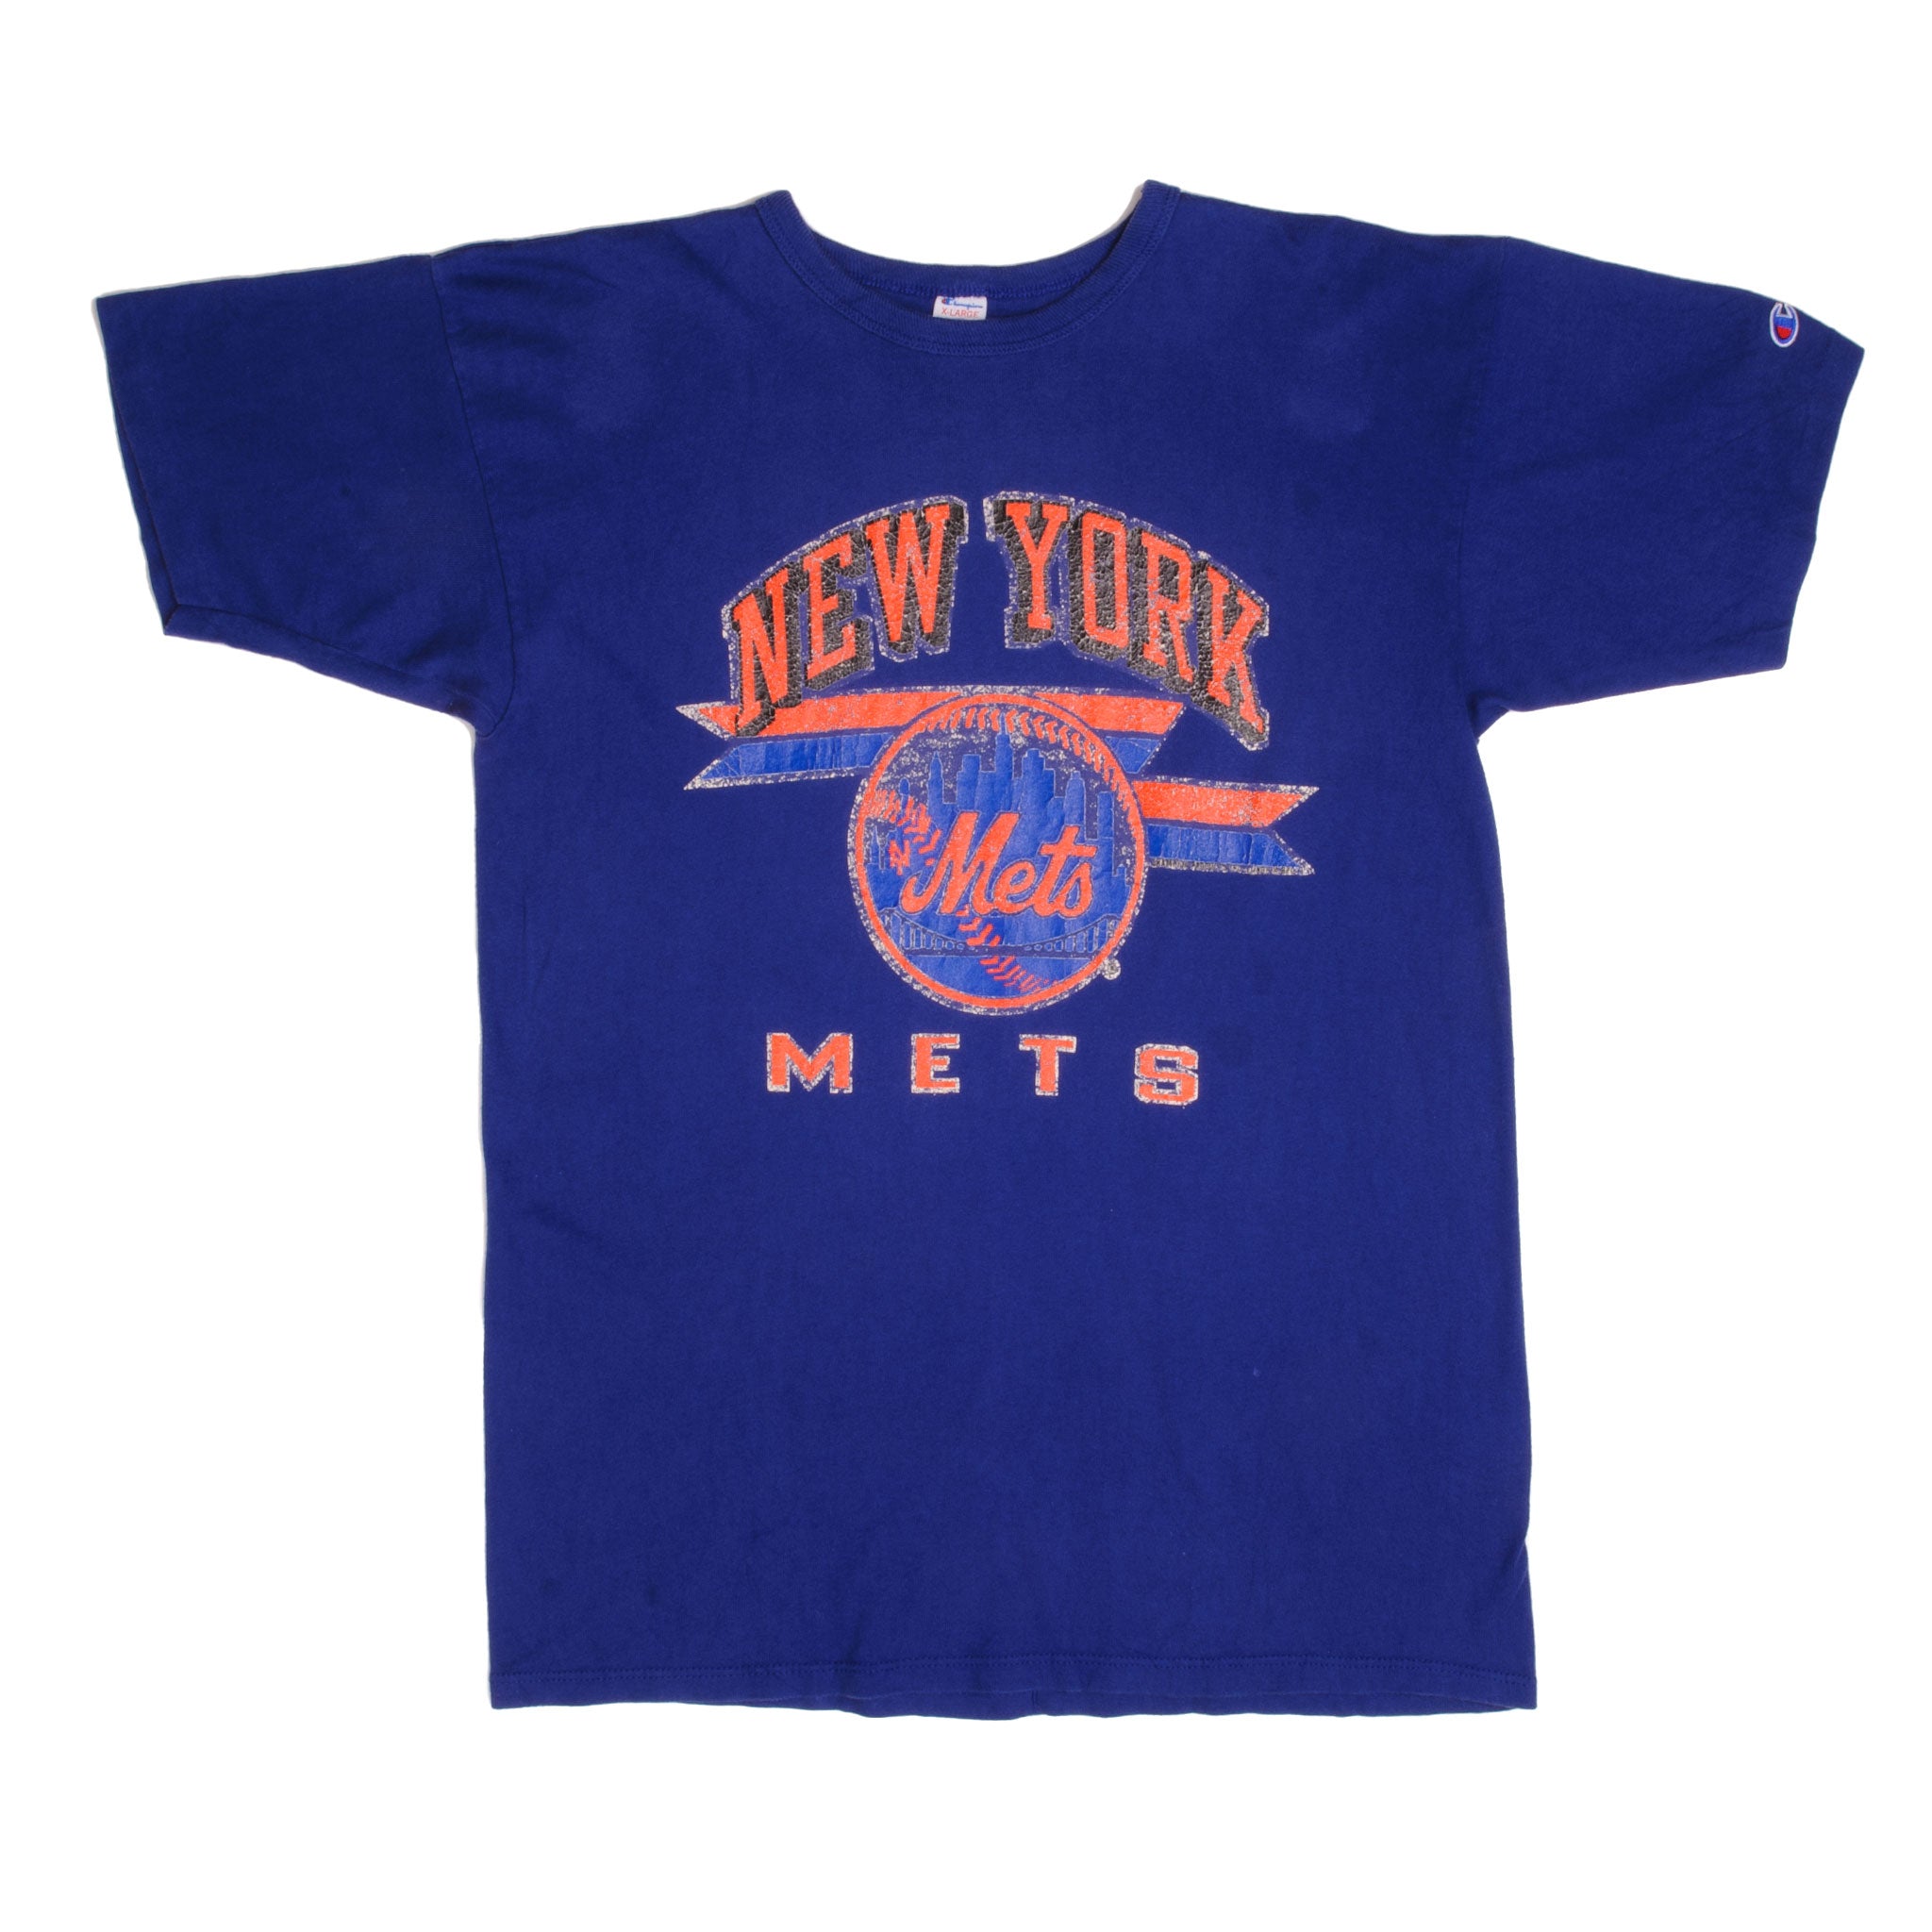 Sports / College Vintage Champion MLB New York Mets Tee Shirt 1988 Size Large Made in USA